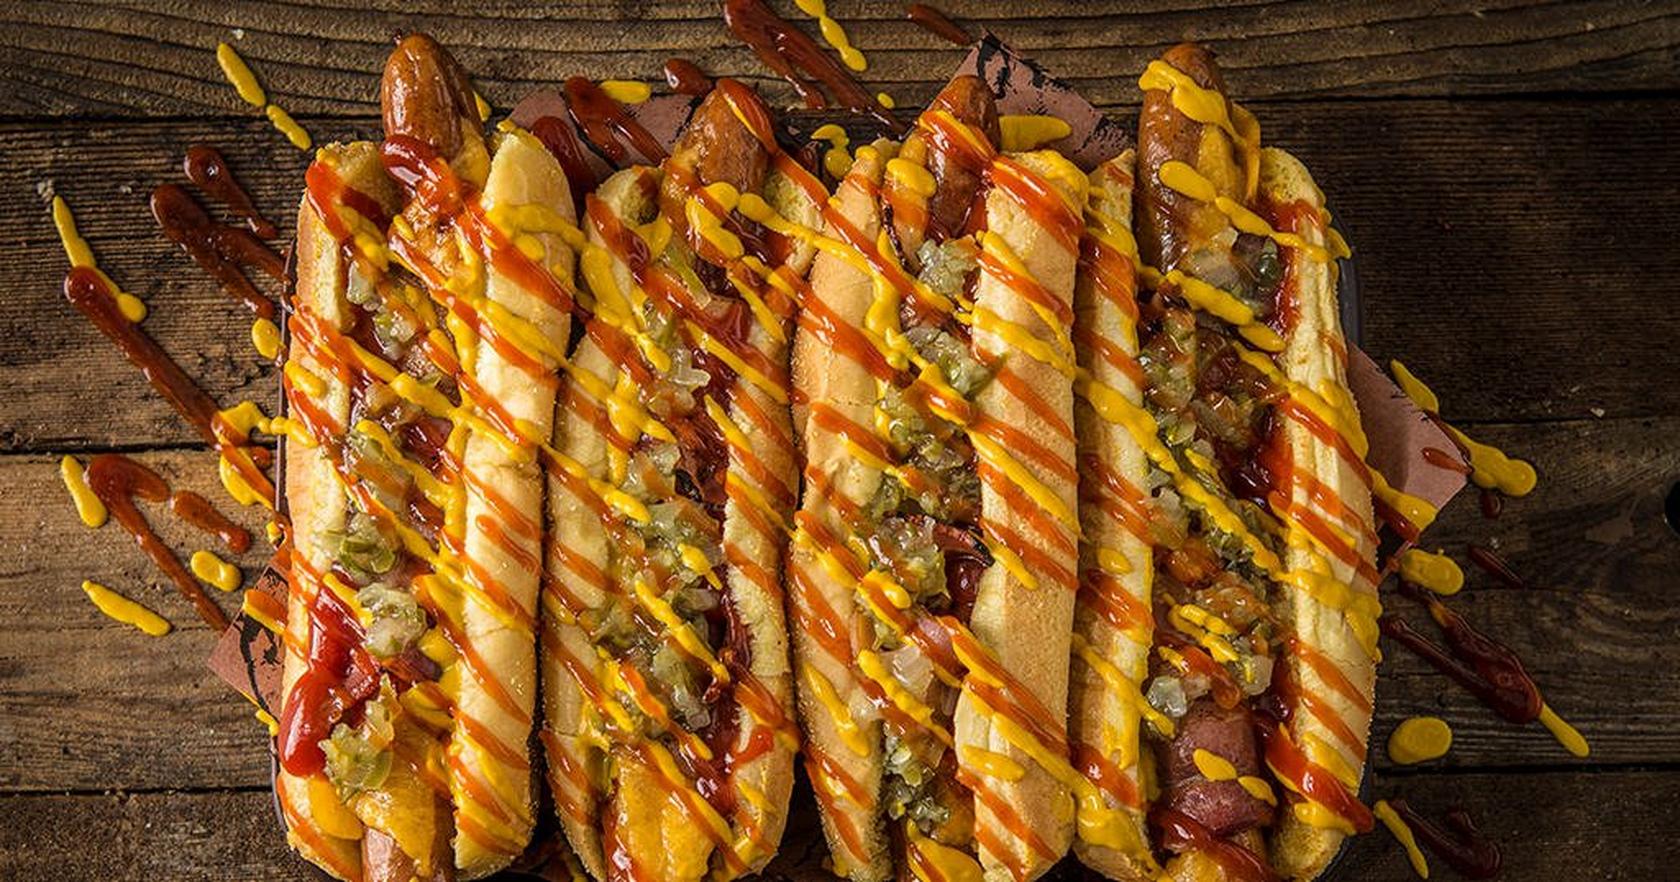 Bacon-Wrapped-Hot-Dogs_Traeger-Wood-Fired-Grills_RE_HE_M